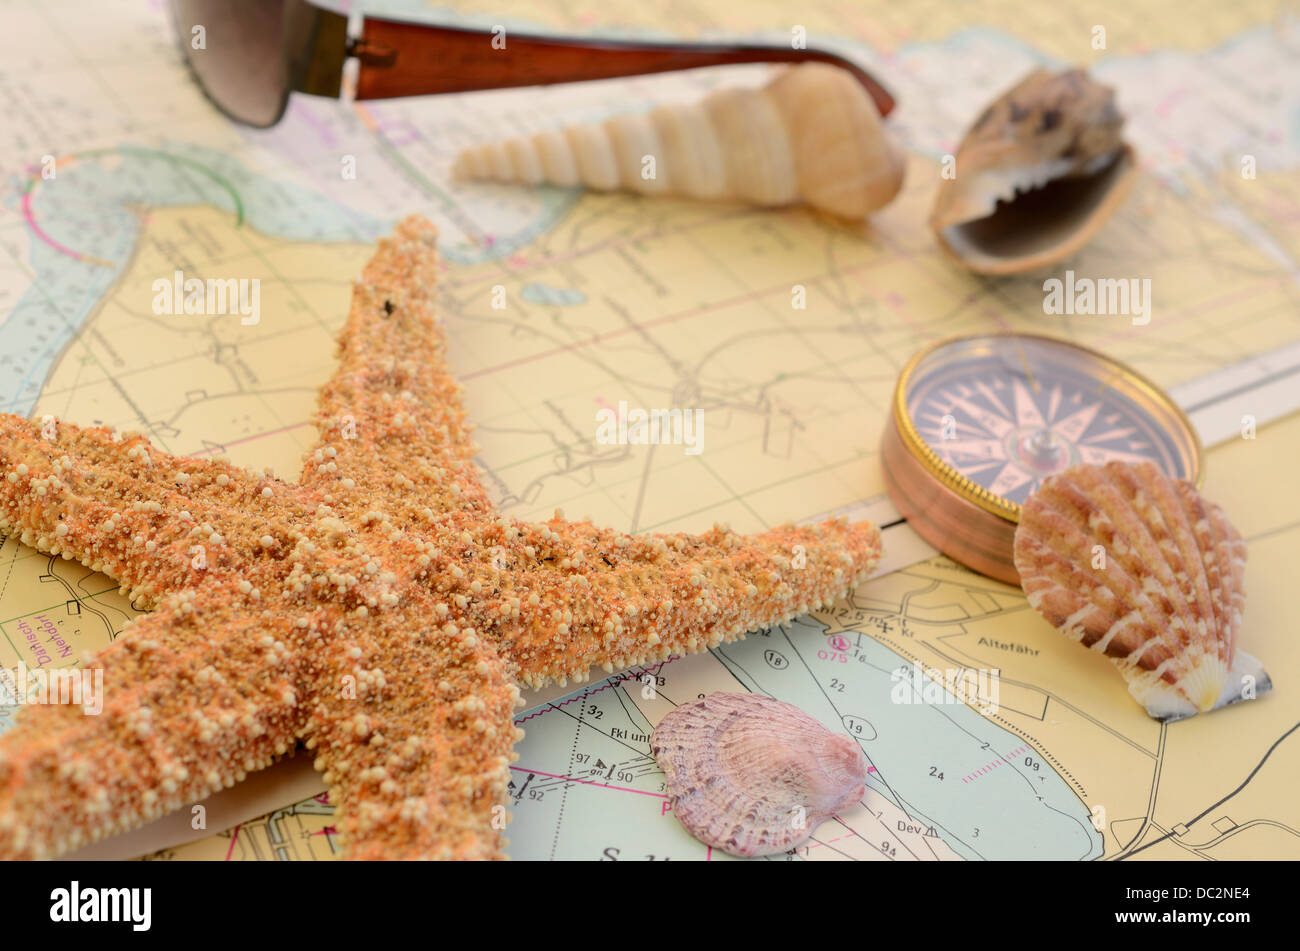 Travel concept image with starfish and sea cards Stock Photo